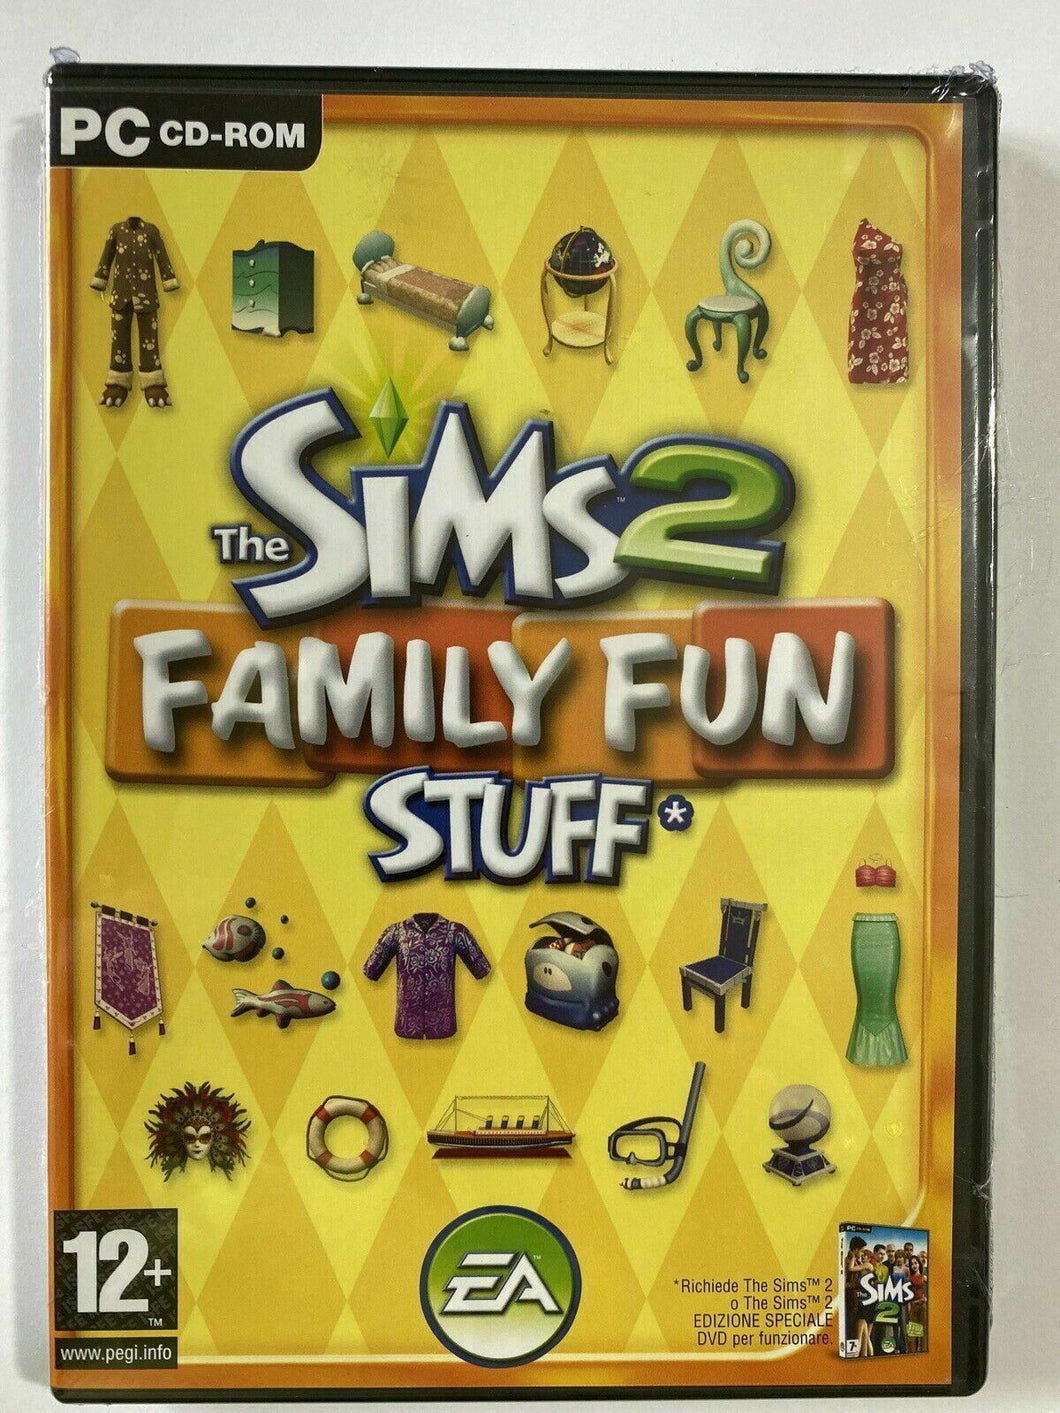 The Sims 2 Family Fun Stuff - Expansion Pack - PC NUOVO